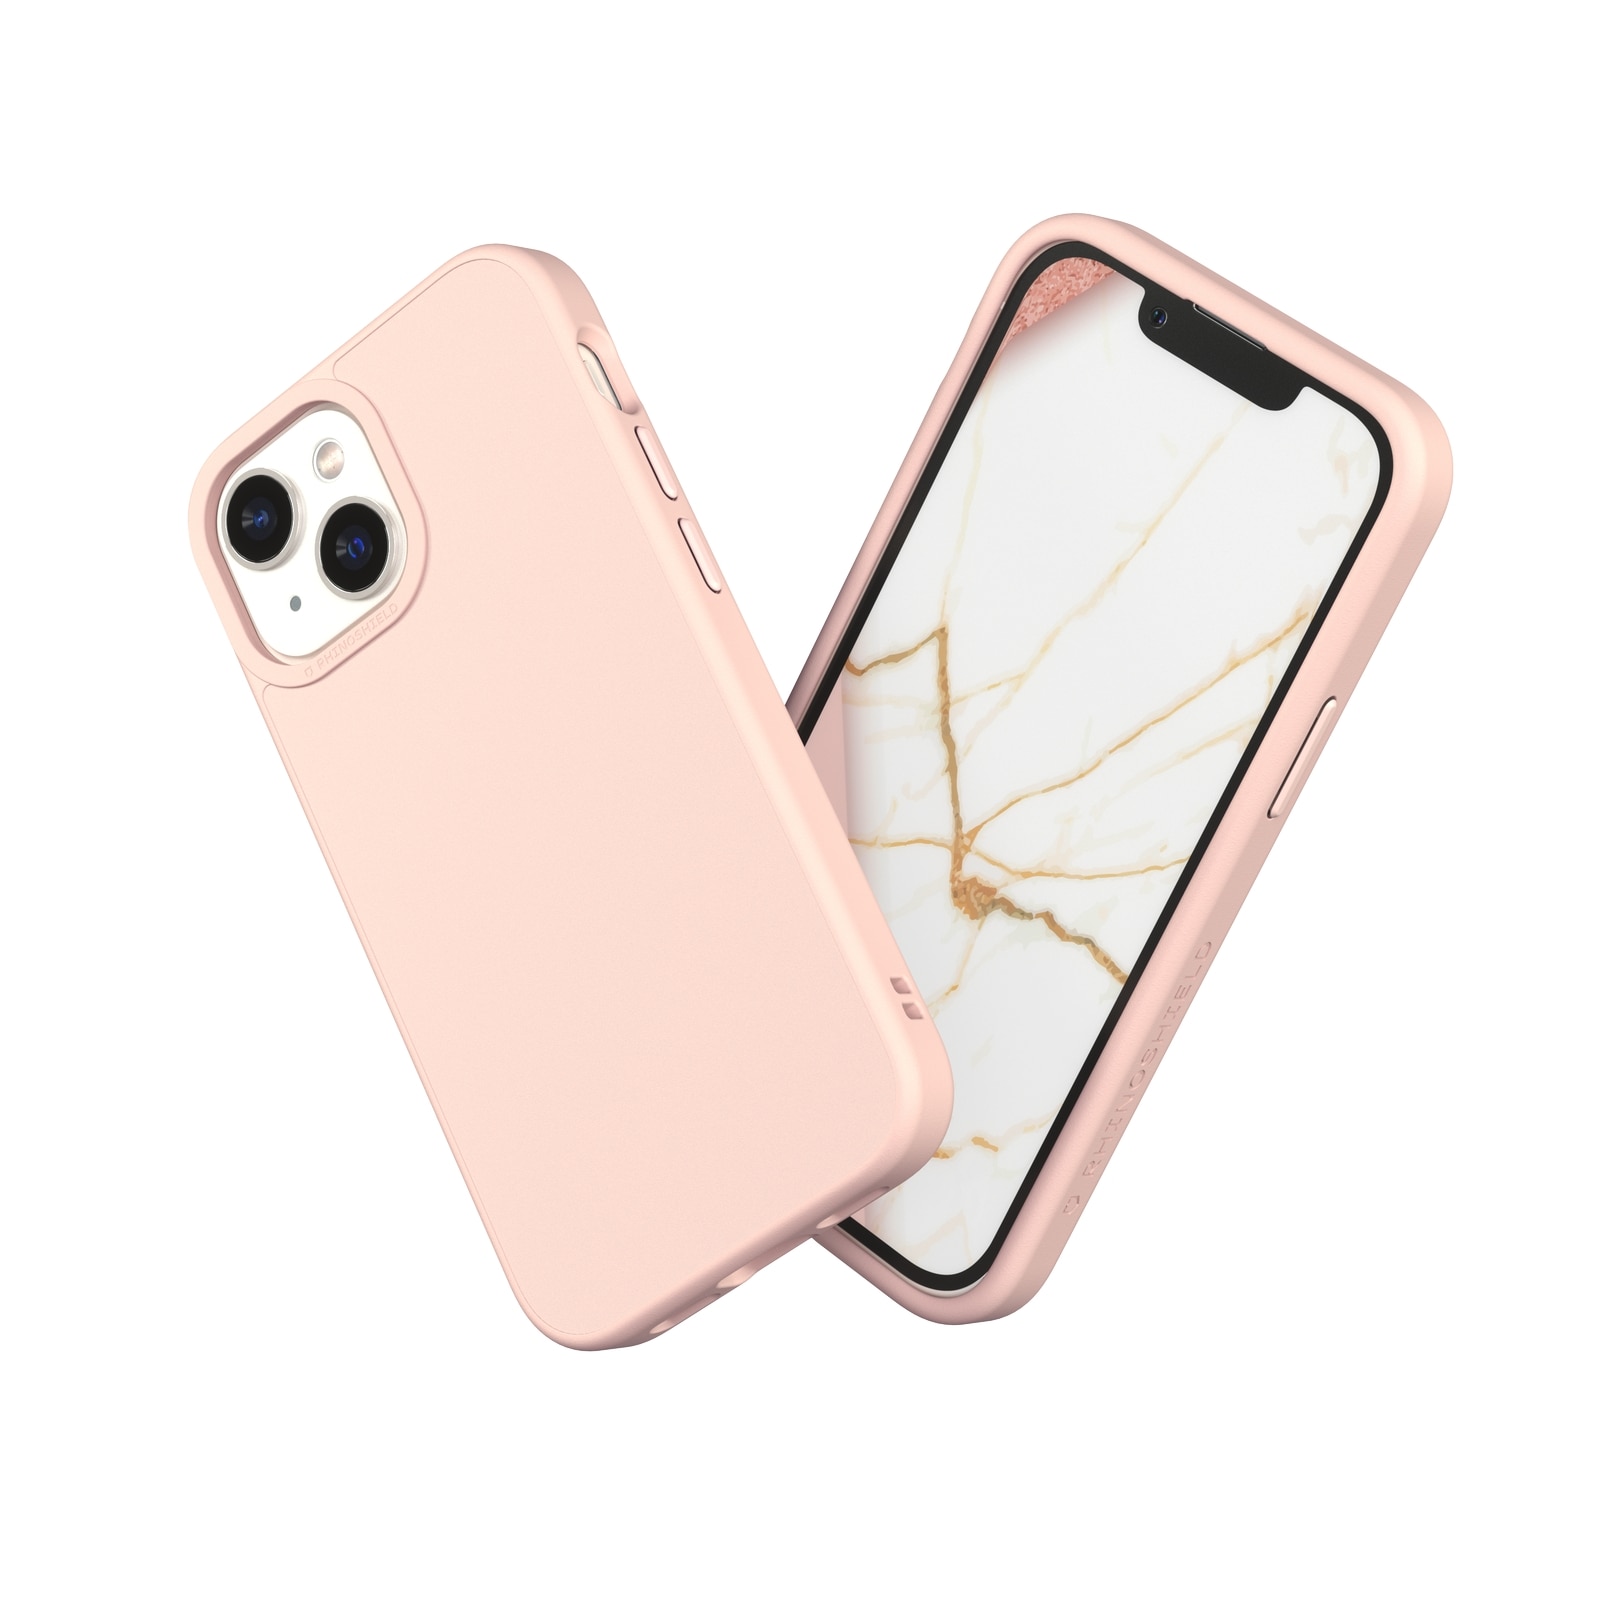 SolidSuit Cover iPhone 13 Mini Blush Pink